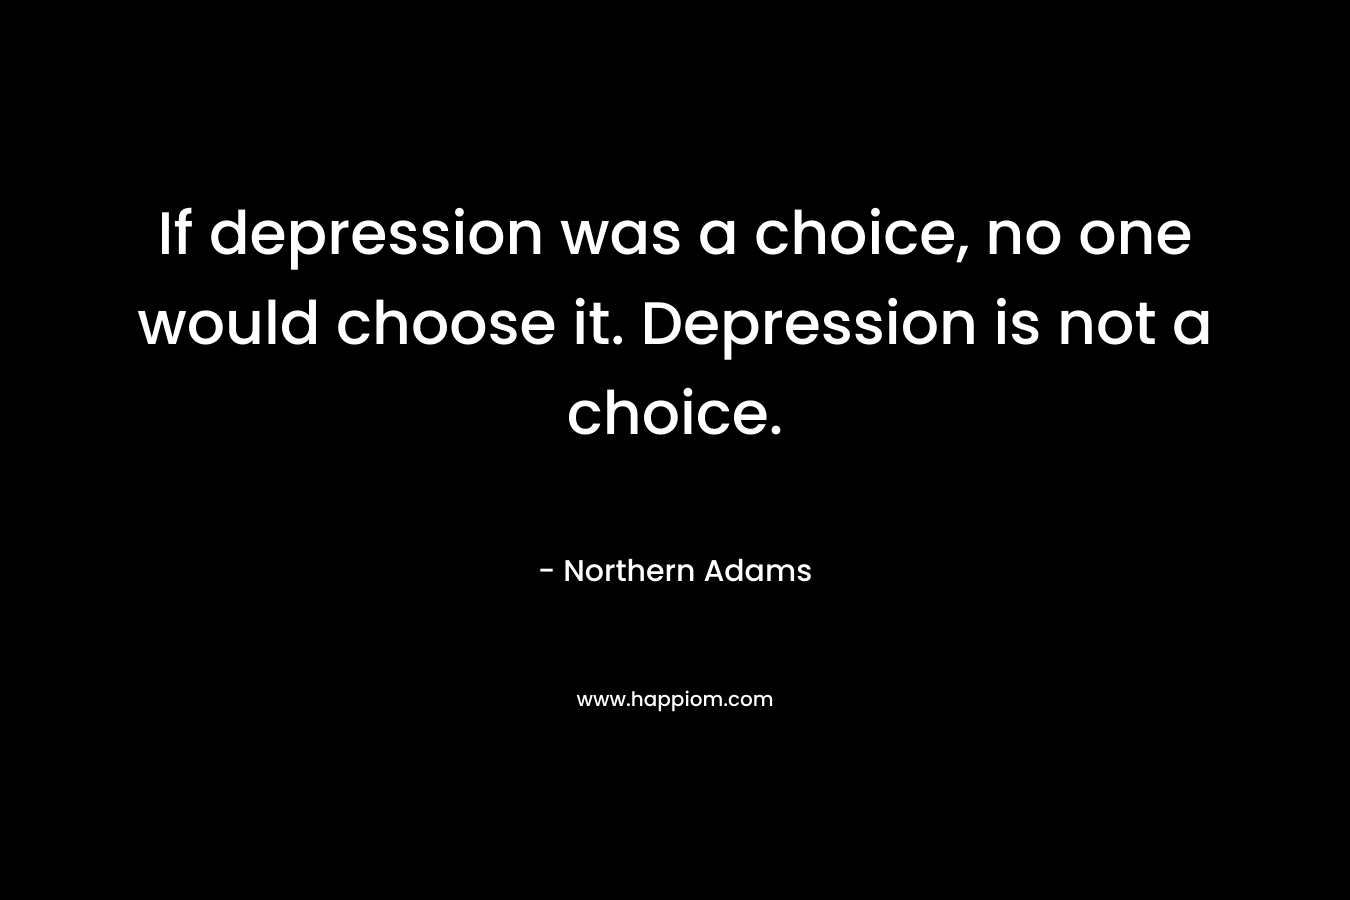 If depression was a choice, no one would choose it. Depression is not a choice.